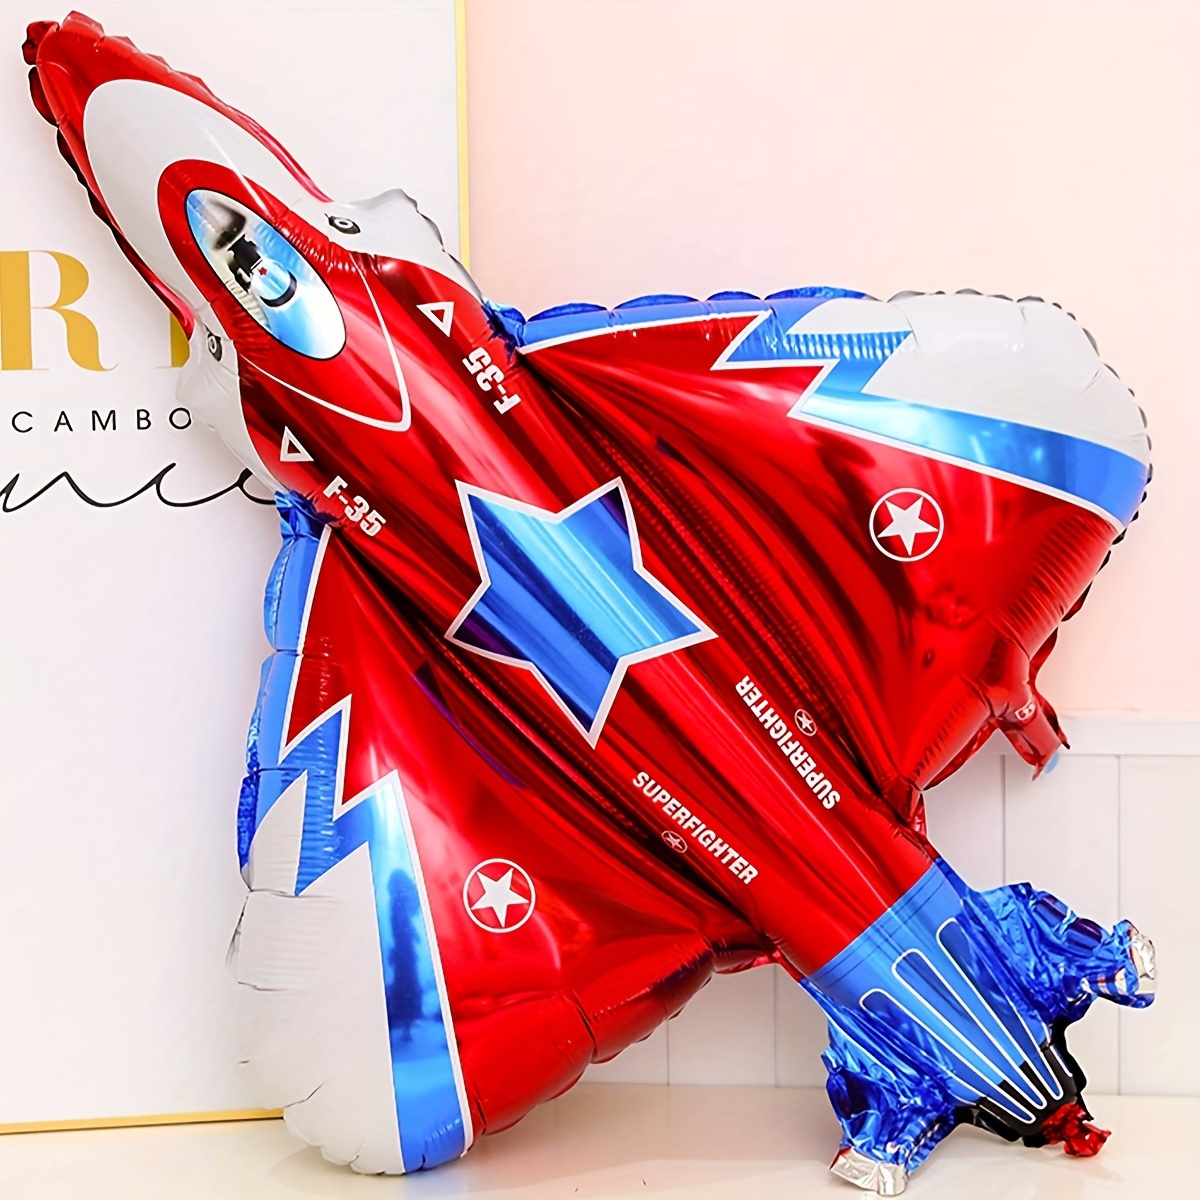 

2pcs Airplane Balloon Fighter Jet Airplane Balloon Aircraft Shape Foil Mylar Balloon For Birthday Party Supplies Decoration